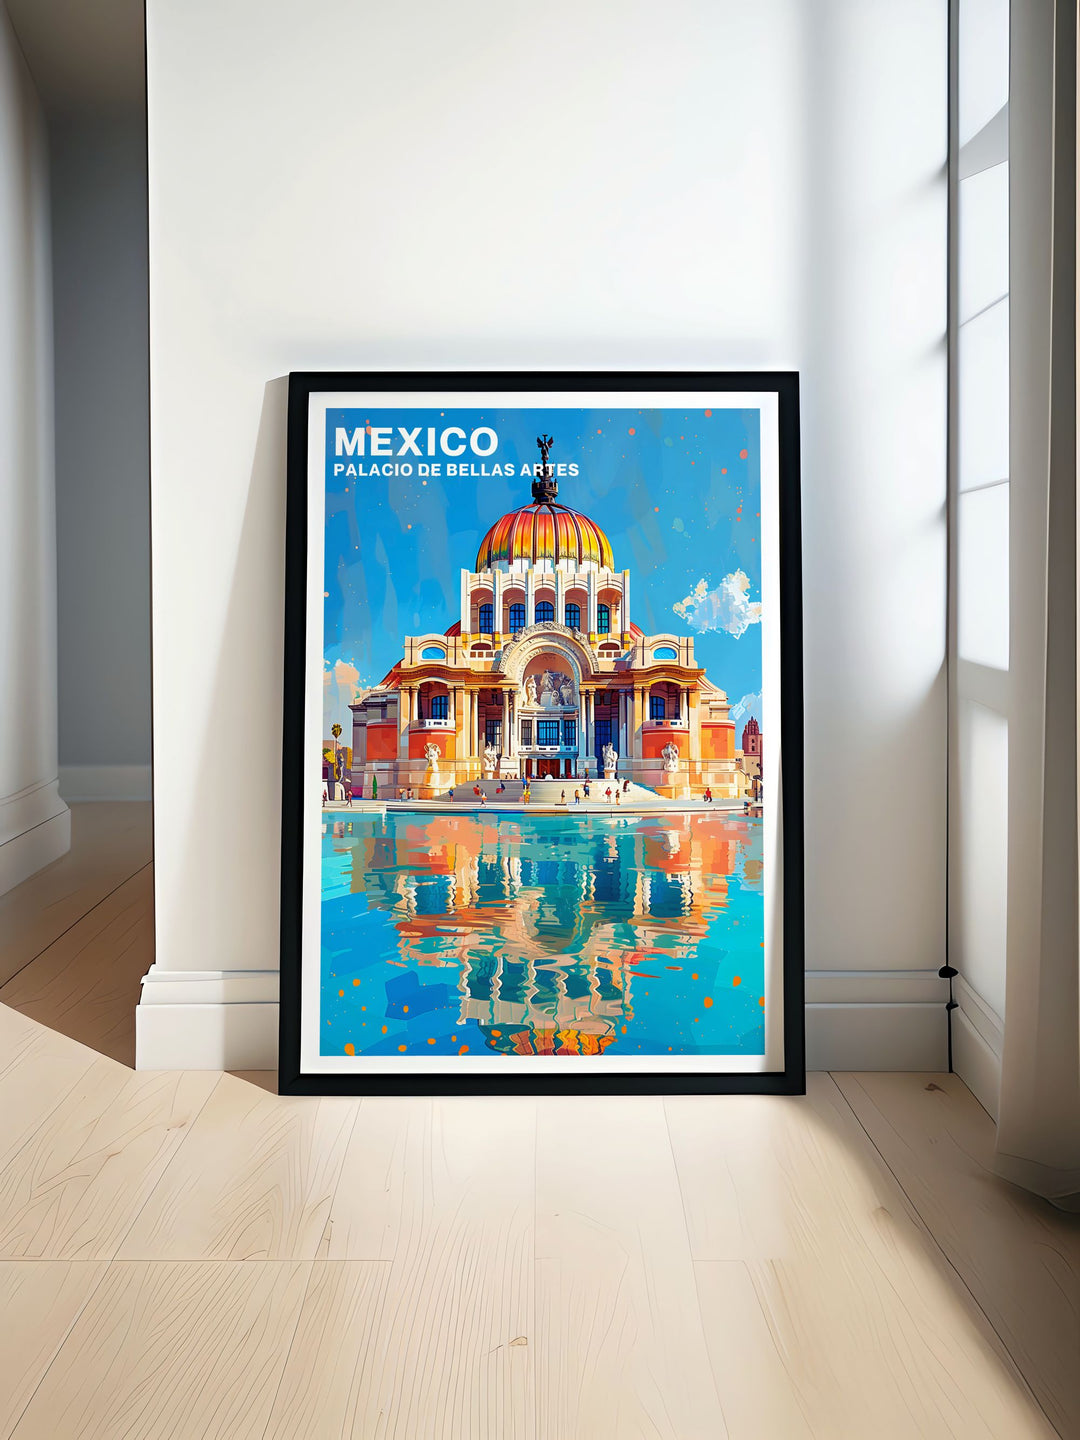 Experience the artistic majesty of the Palacio de Bellas Artes with this detailed poster, capturing its elegant design and cultural significance, perfect for adding a touch of Mexican artistry to your home.